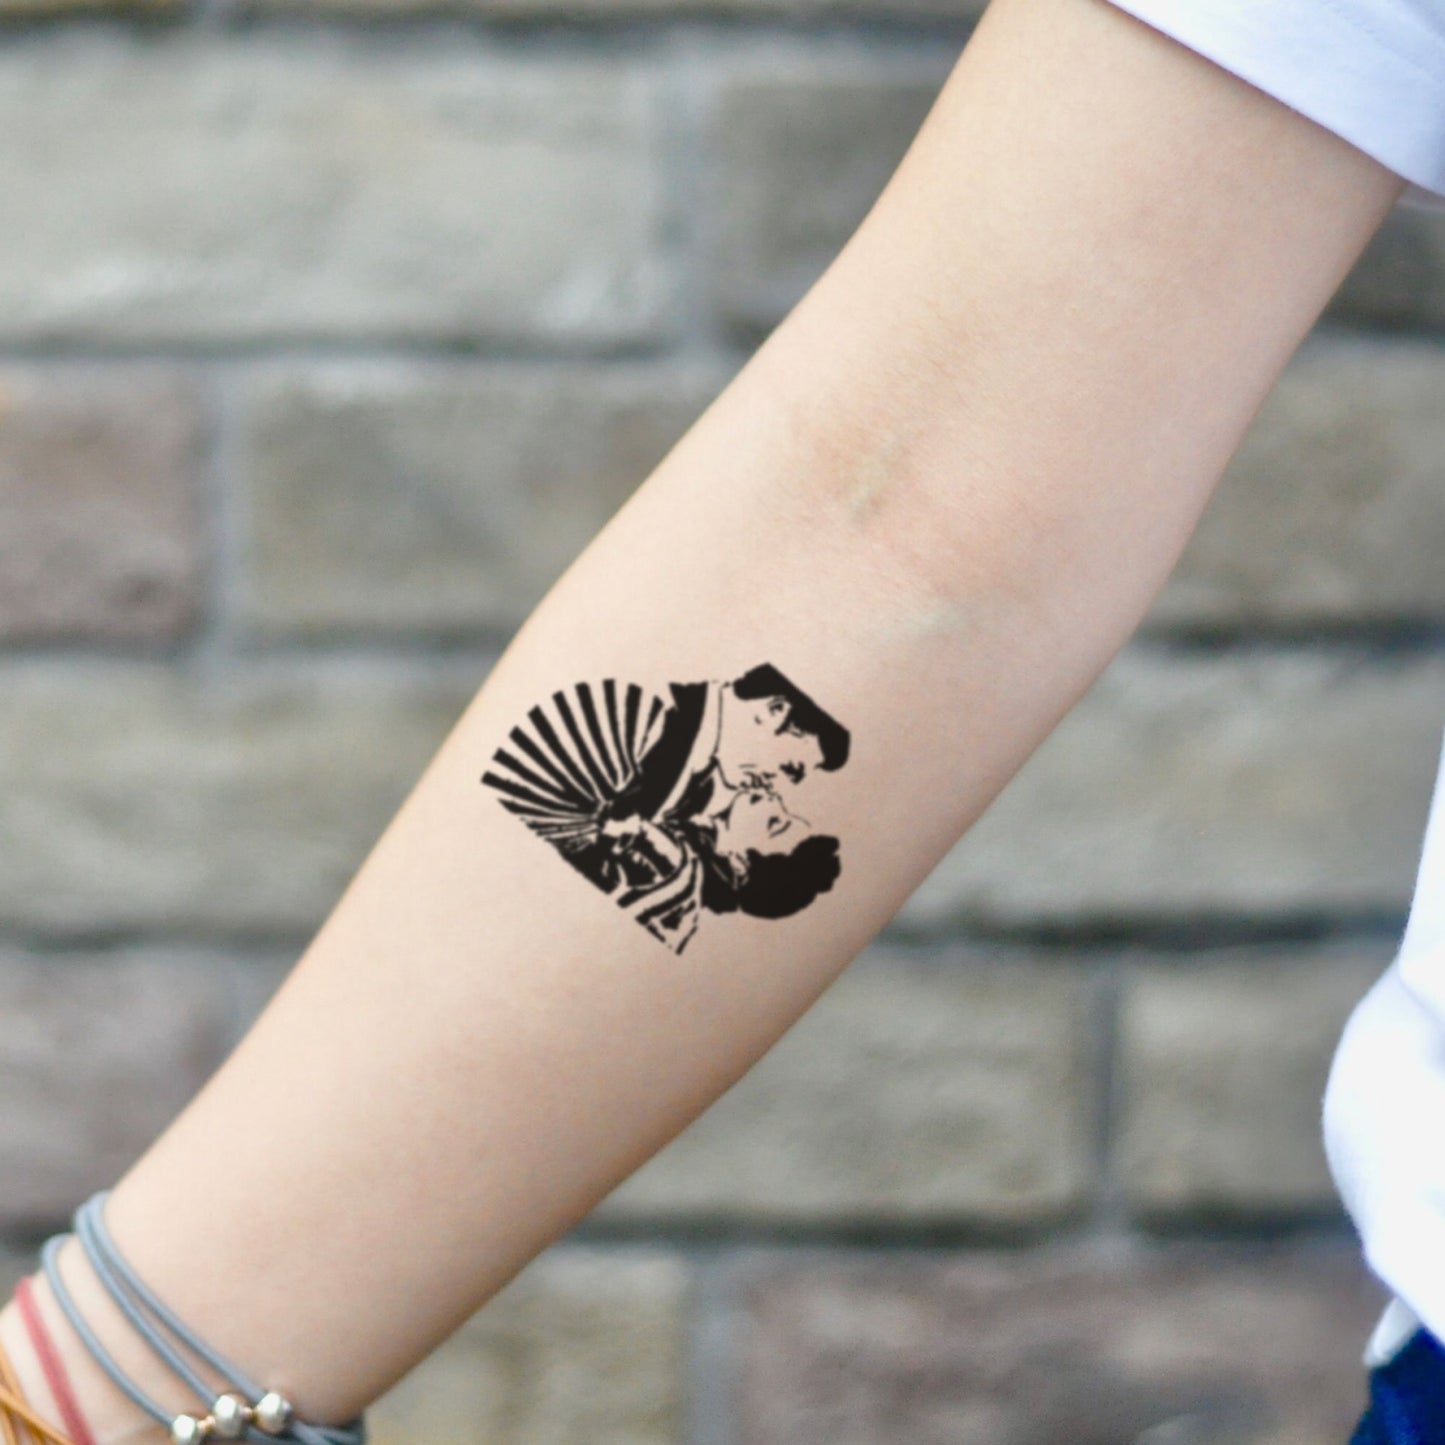 fake small gone with the wind illustrative temporary tattoo sticker design idea on inner arm